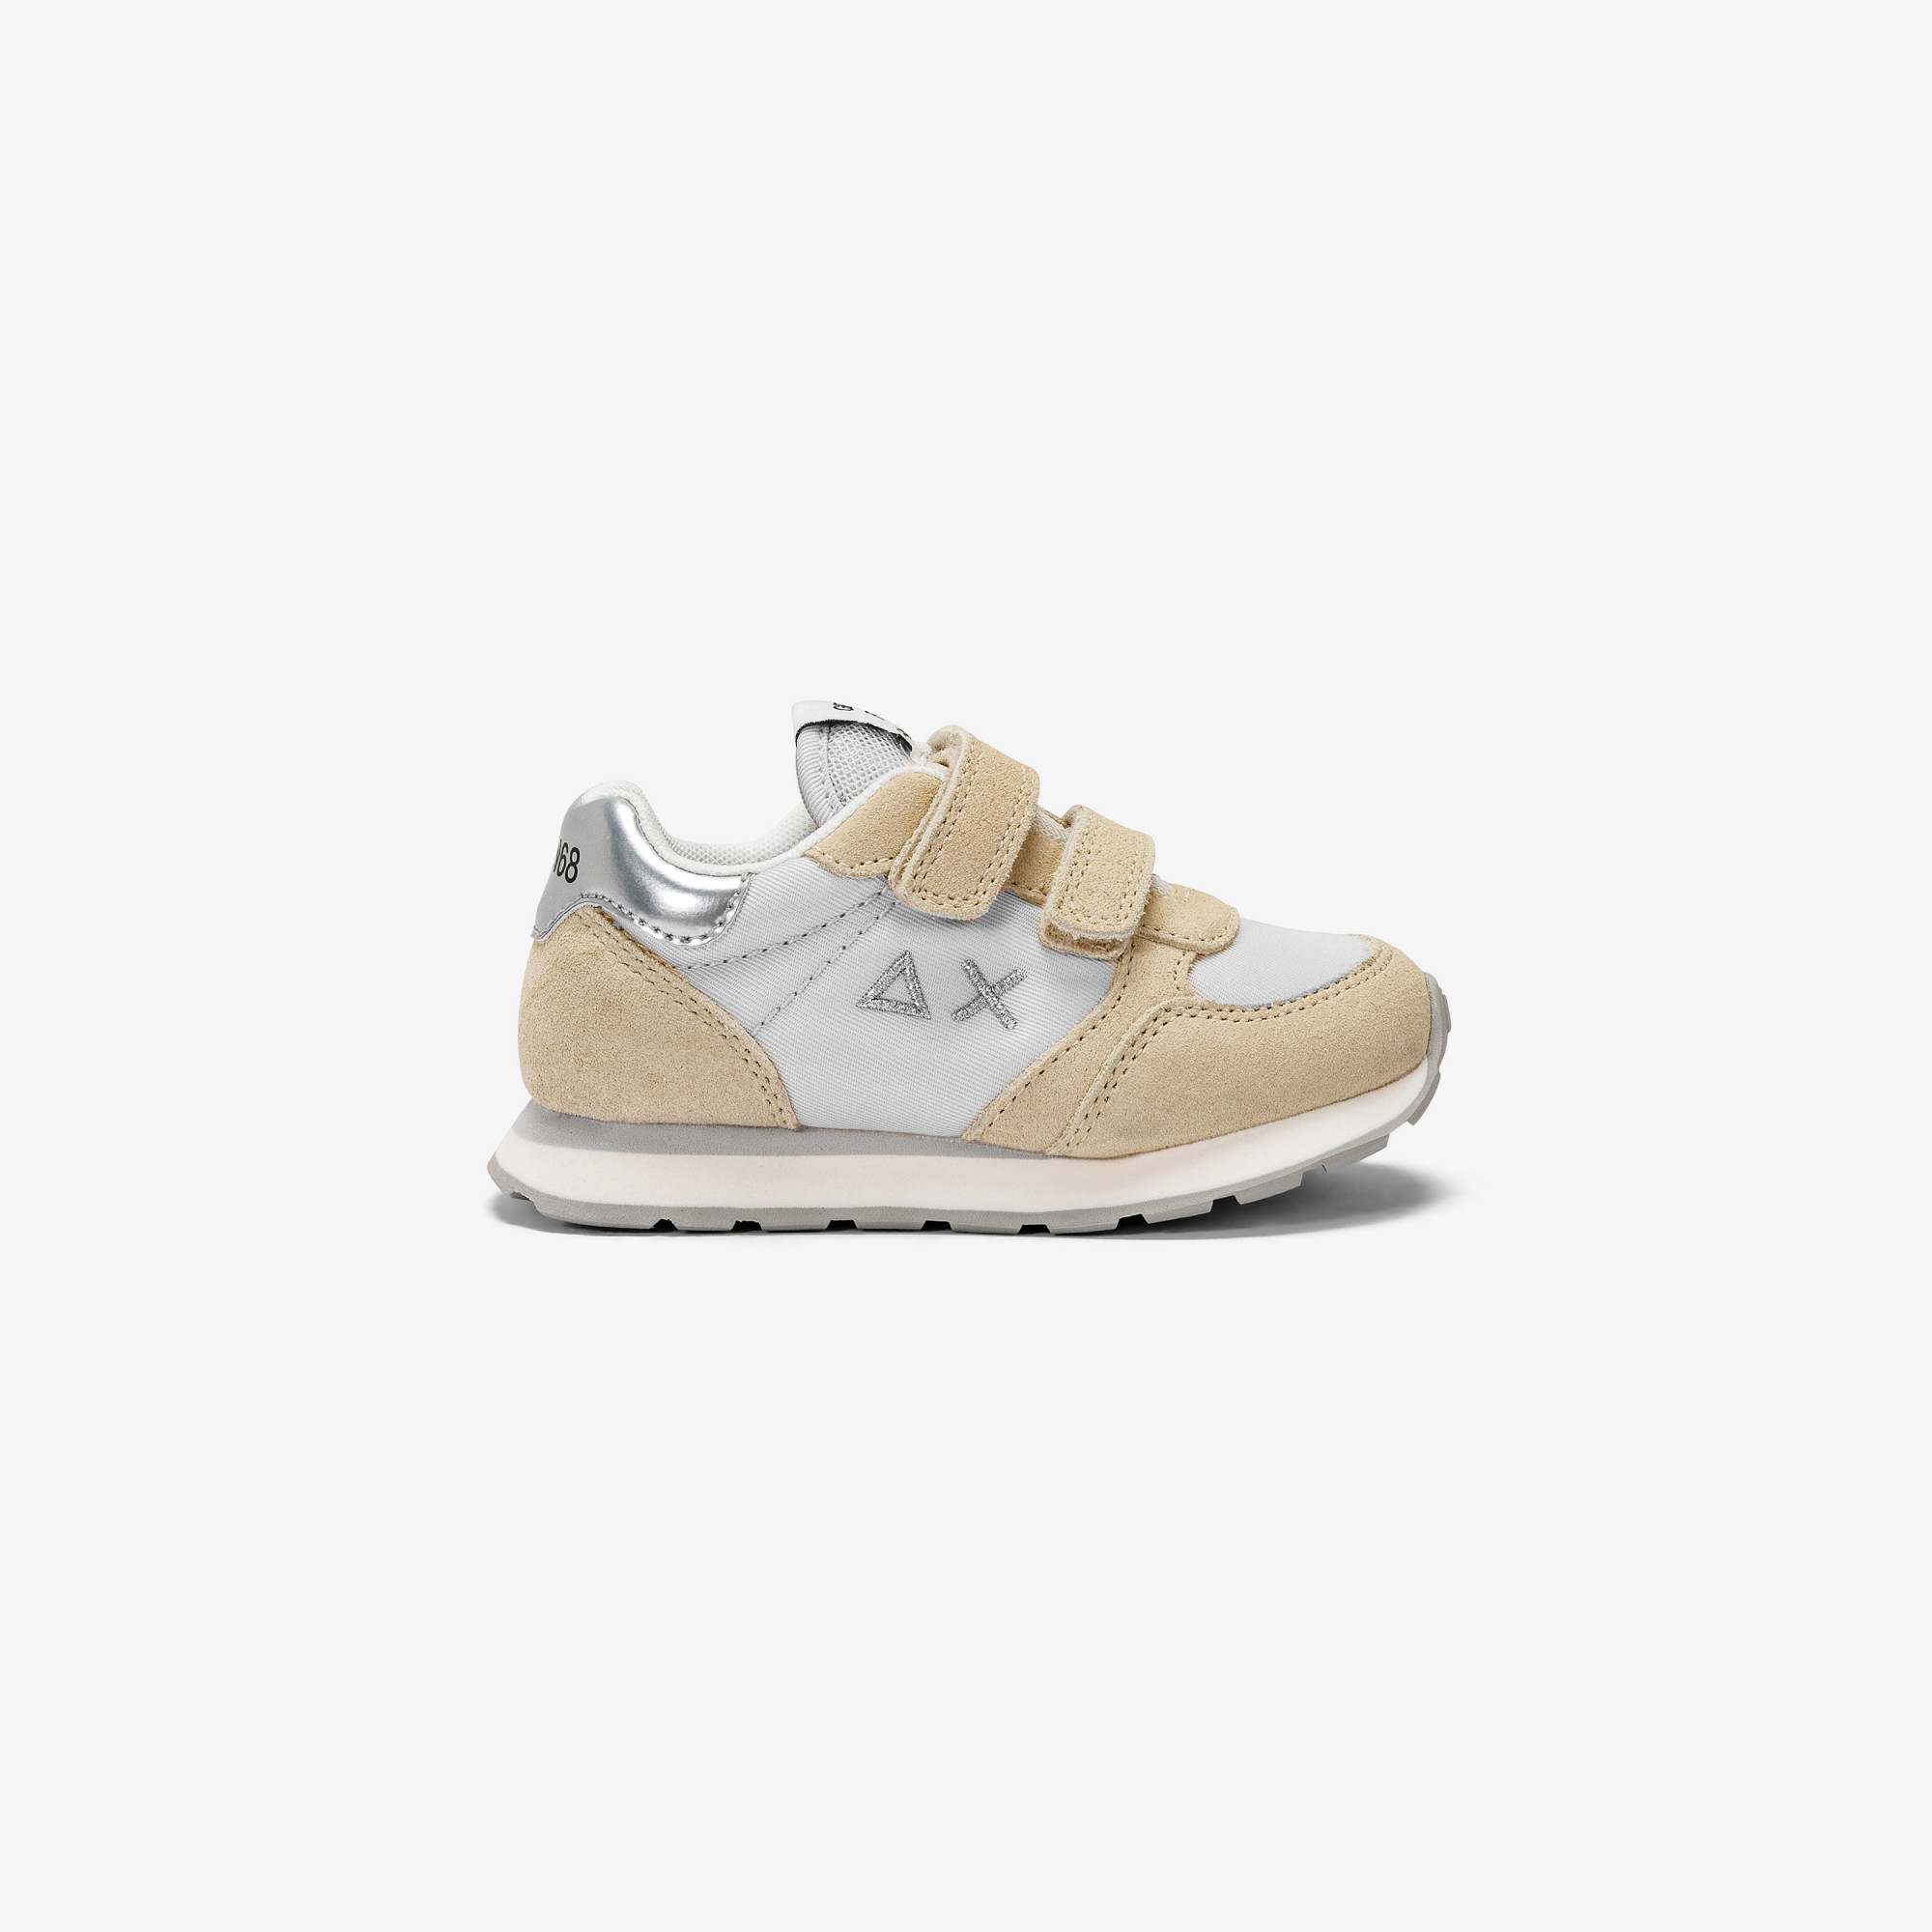 GIRL'S ALLY GOLD SILVER (BABY) OFF WHITE